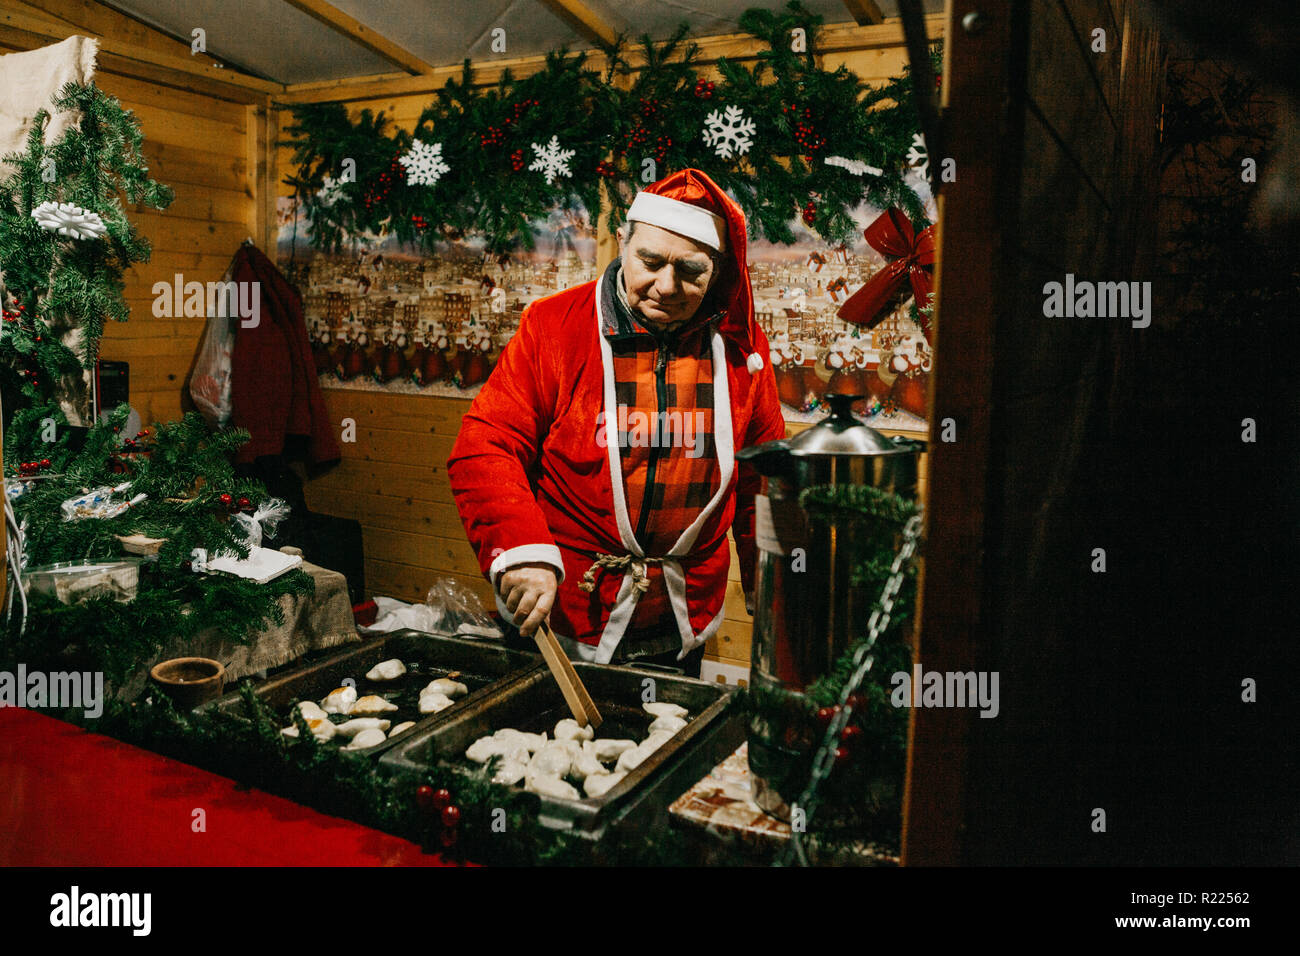 Warsaw, December 25, 2017: A seller dressed as Santa Claus sells fast food at a traditional Christmas night market in Warsaw. Stock Photo